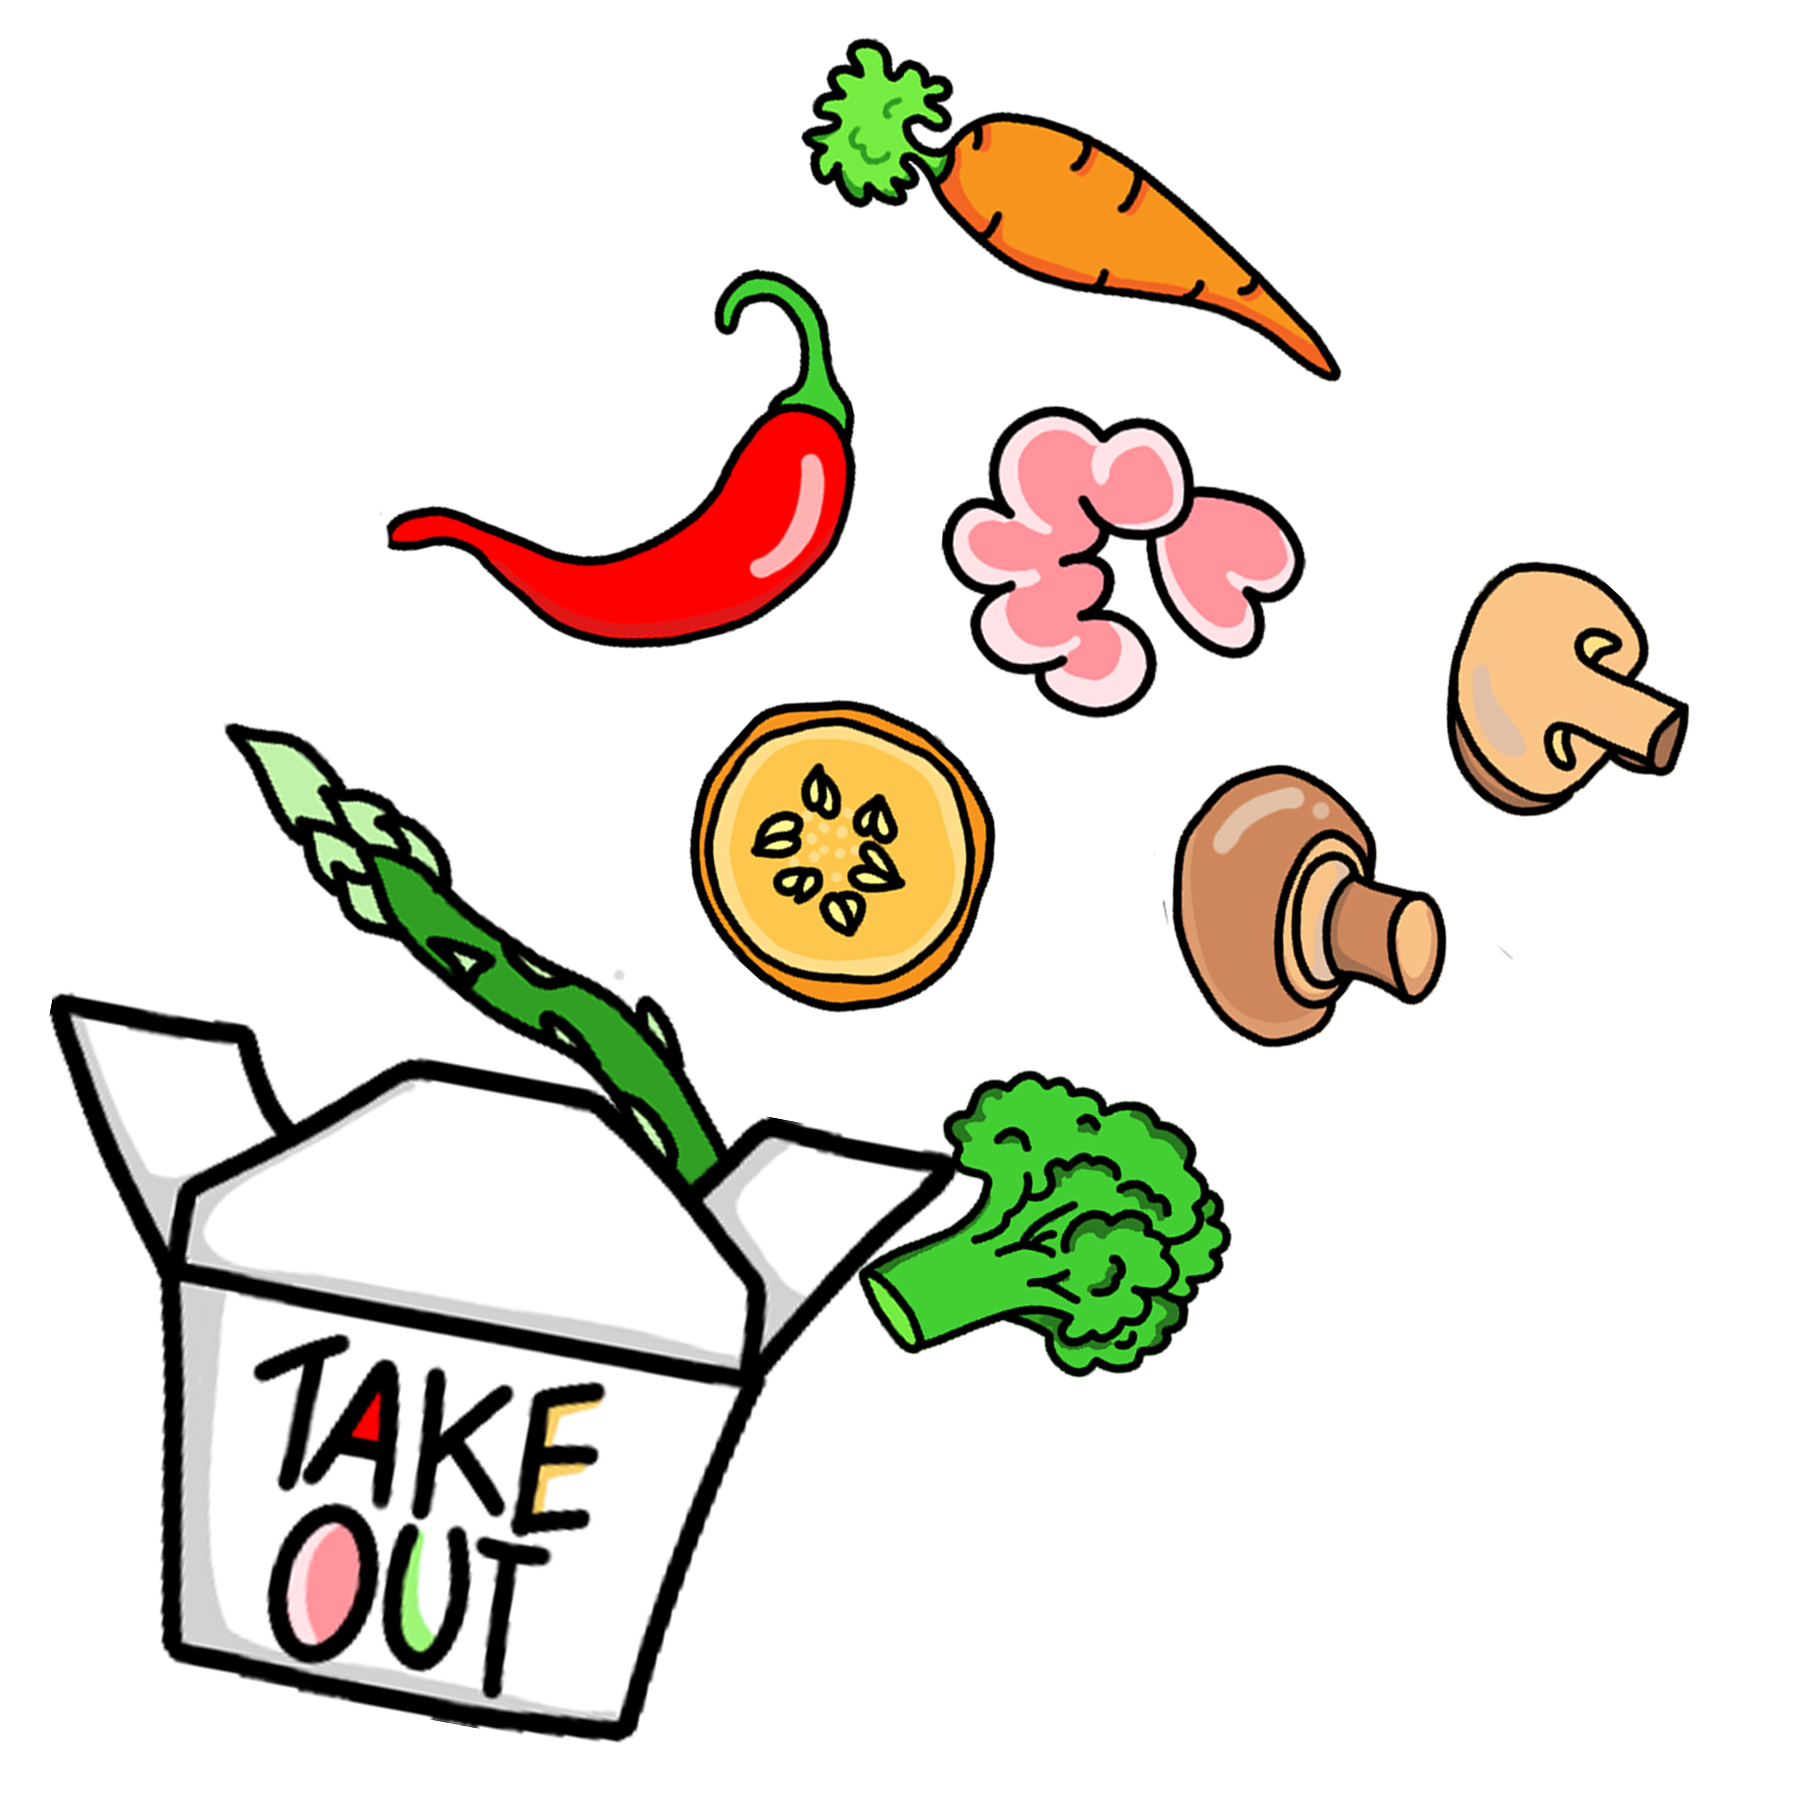 PF16 Take Out Pocket with Vegetables and Shrimp Diecut Stickers